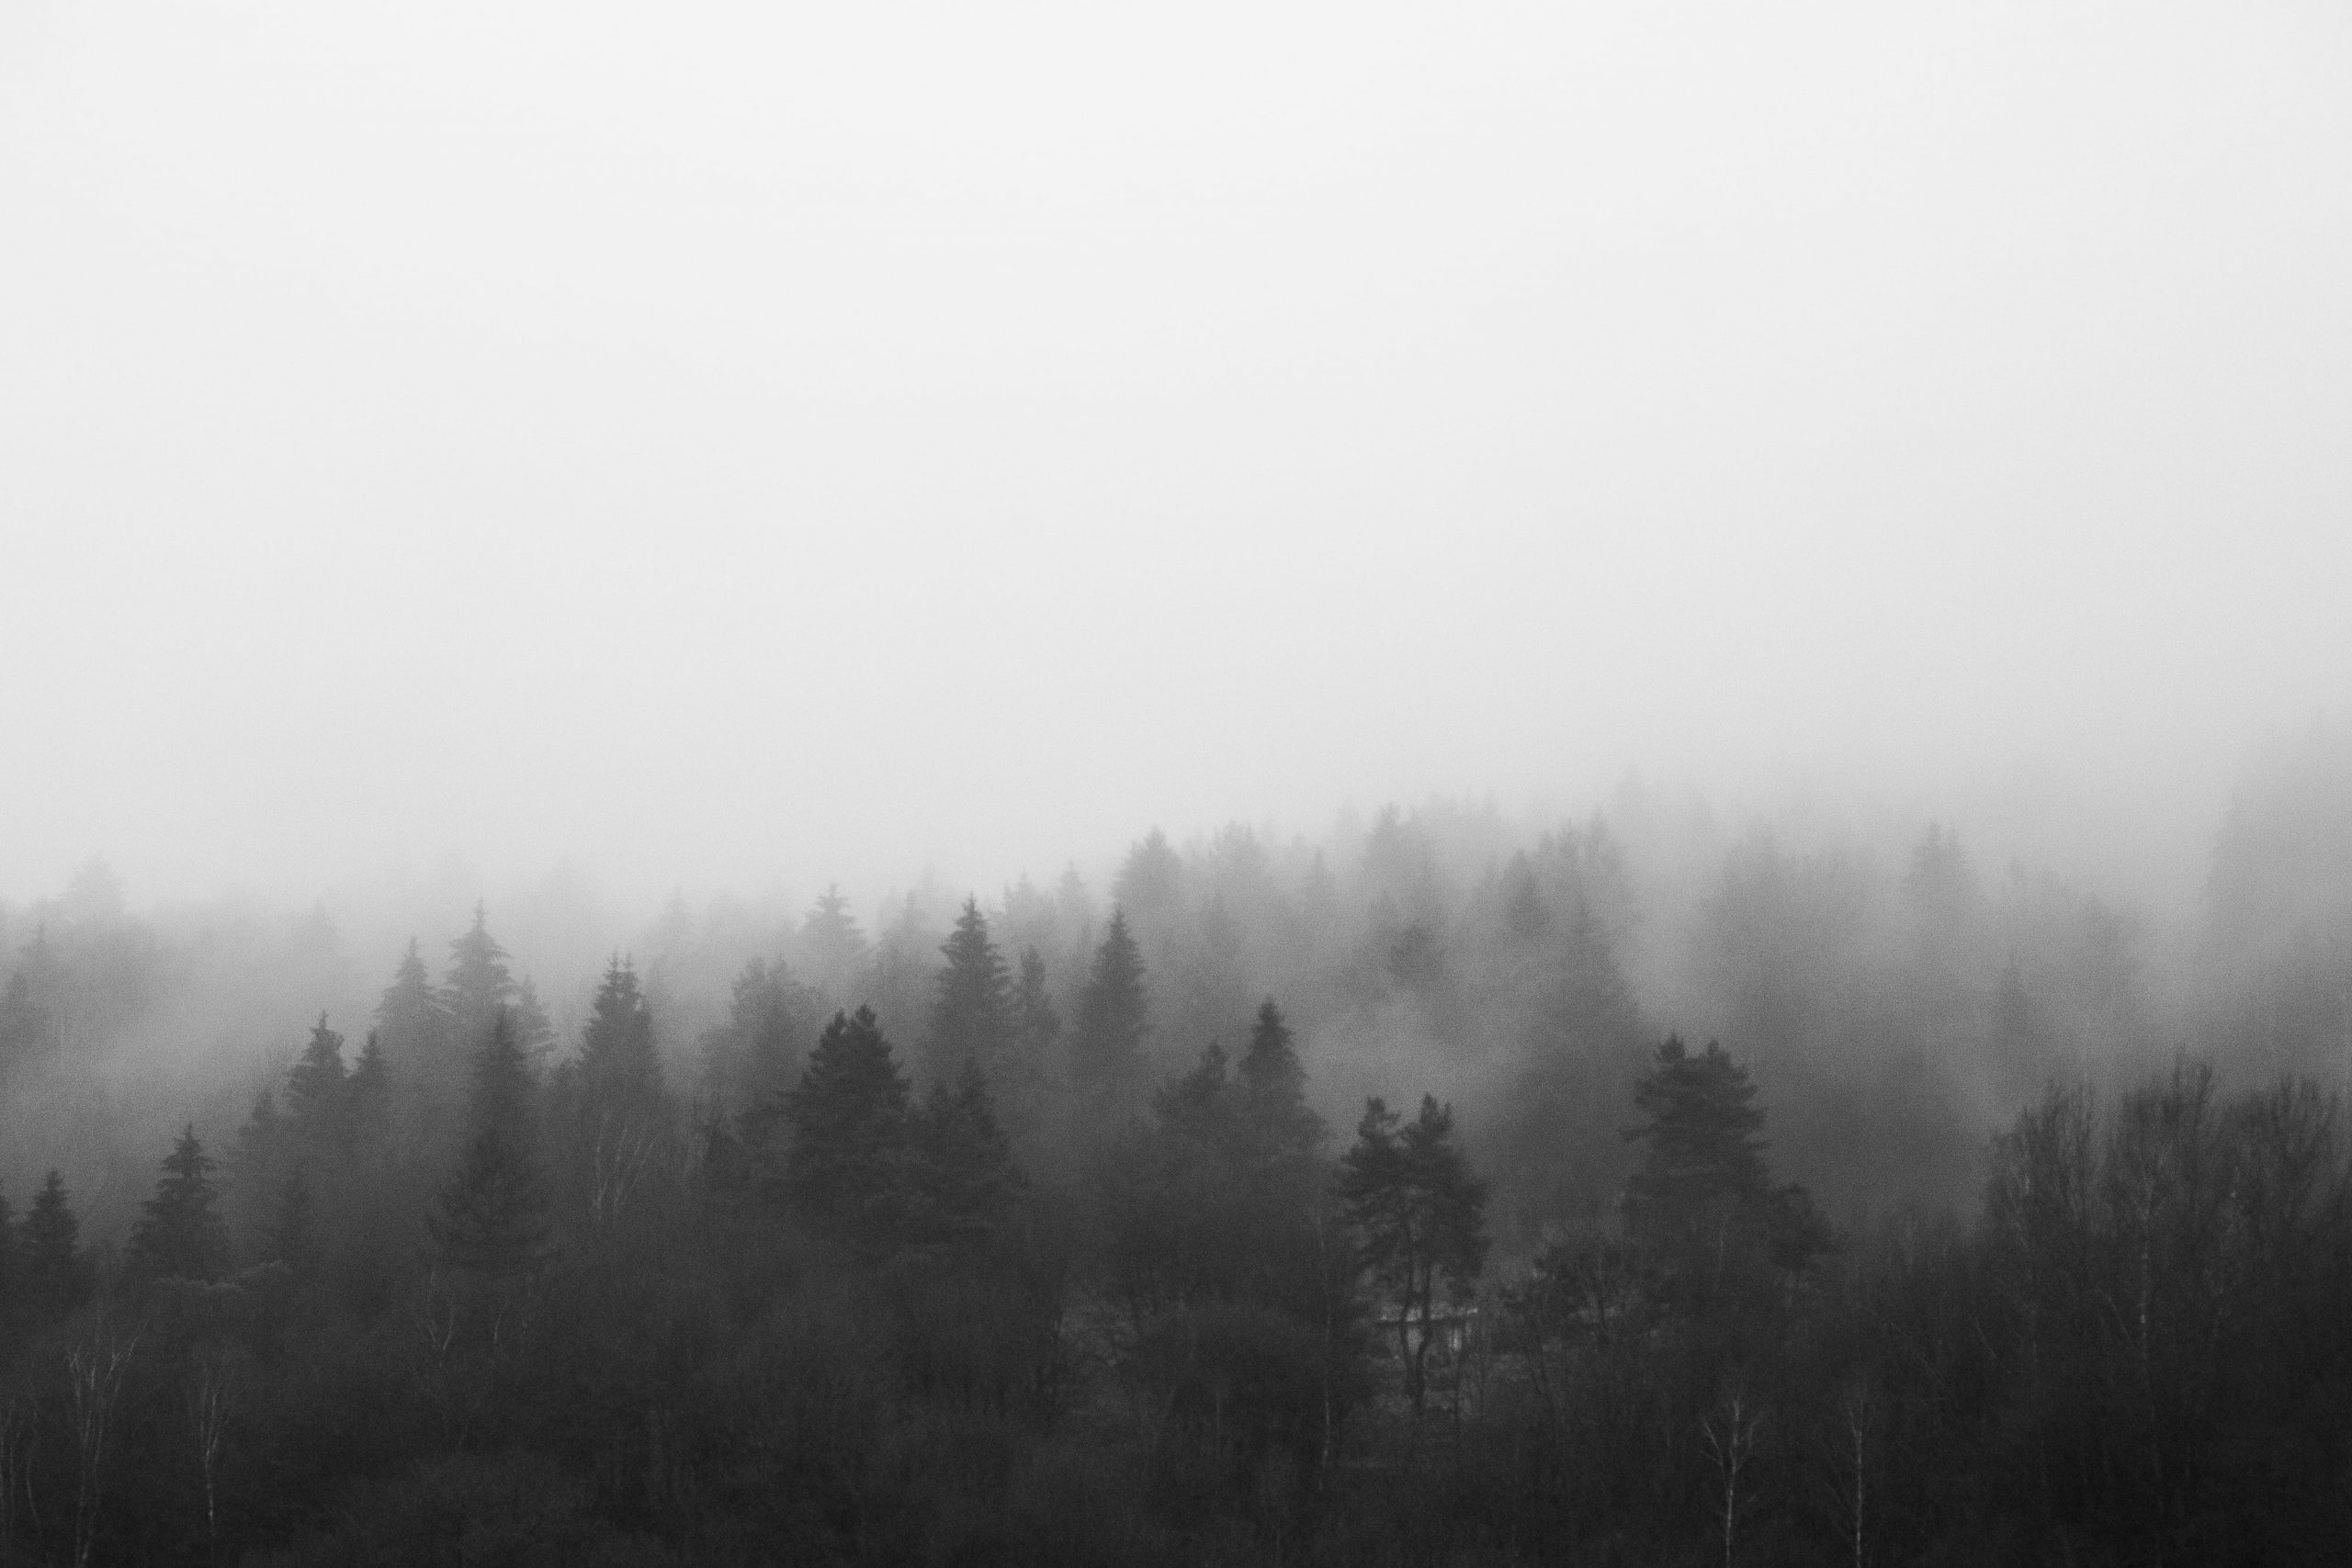 Wallpaper Black And White Morning Foggy Forest, Bw, Clouds - Wallpaperforu